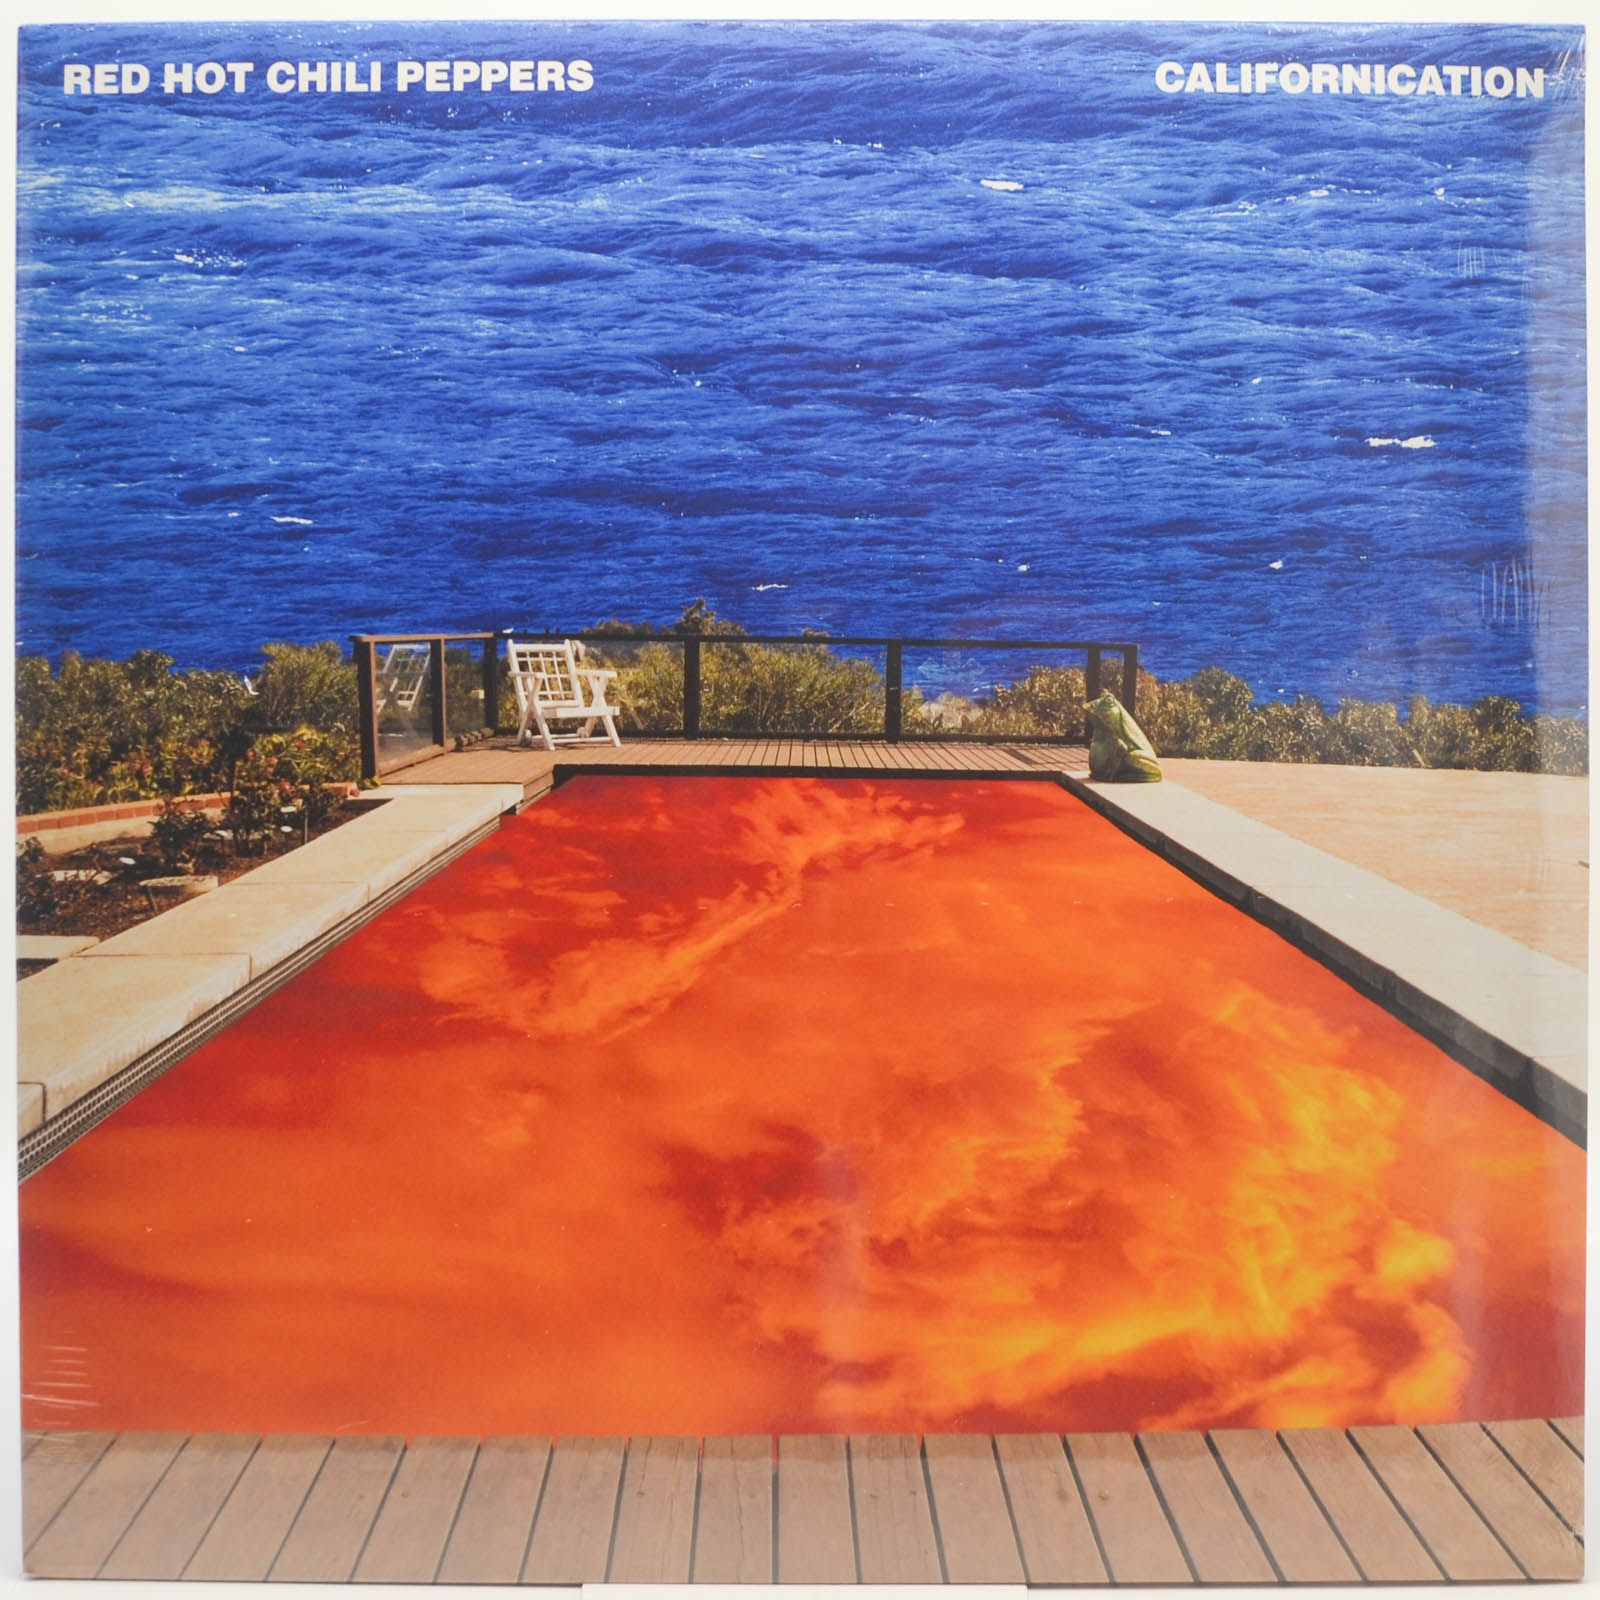 Red Hot Chili Peppers — Californication (2LP), 1999